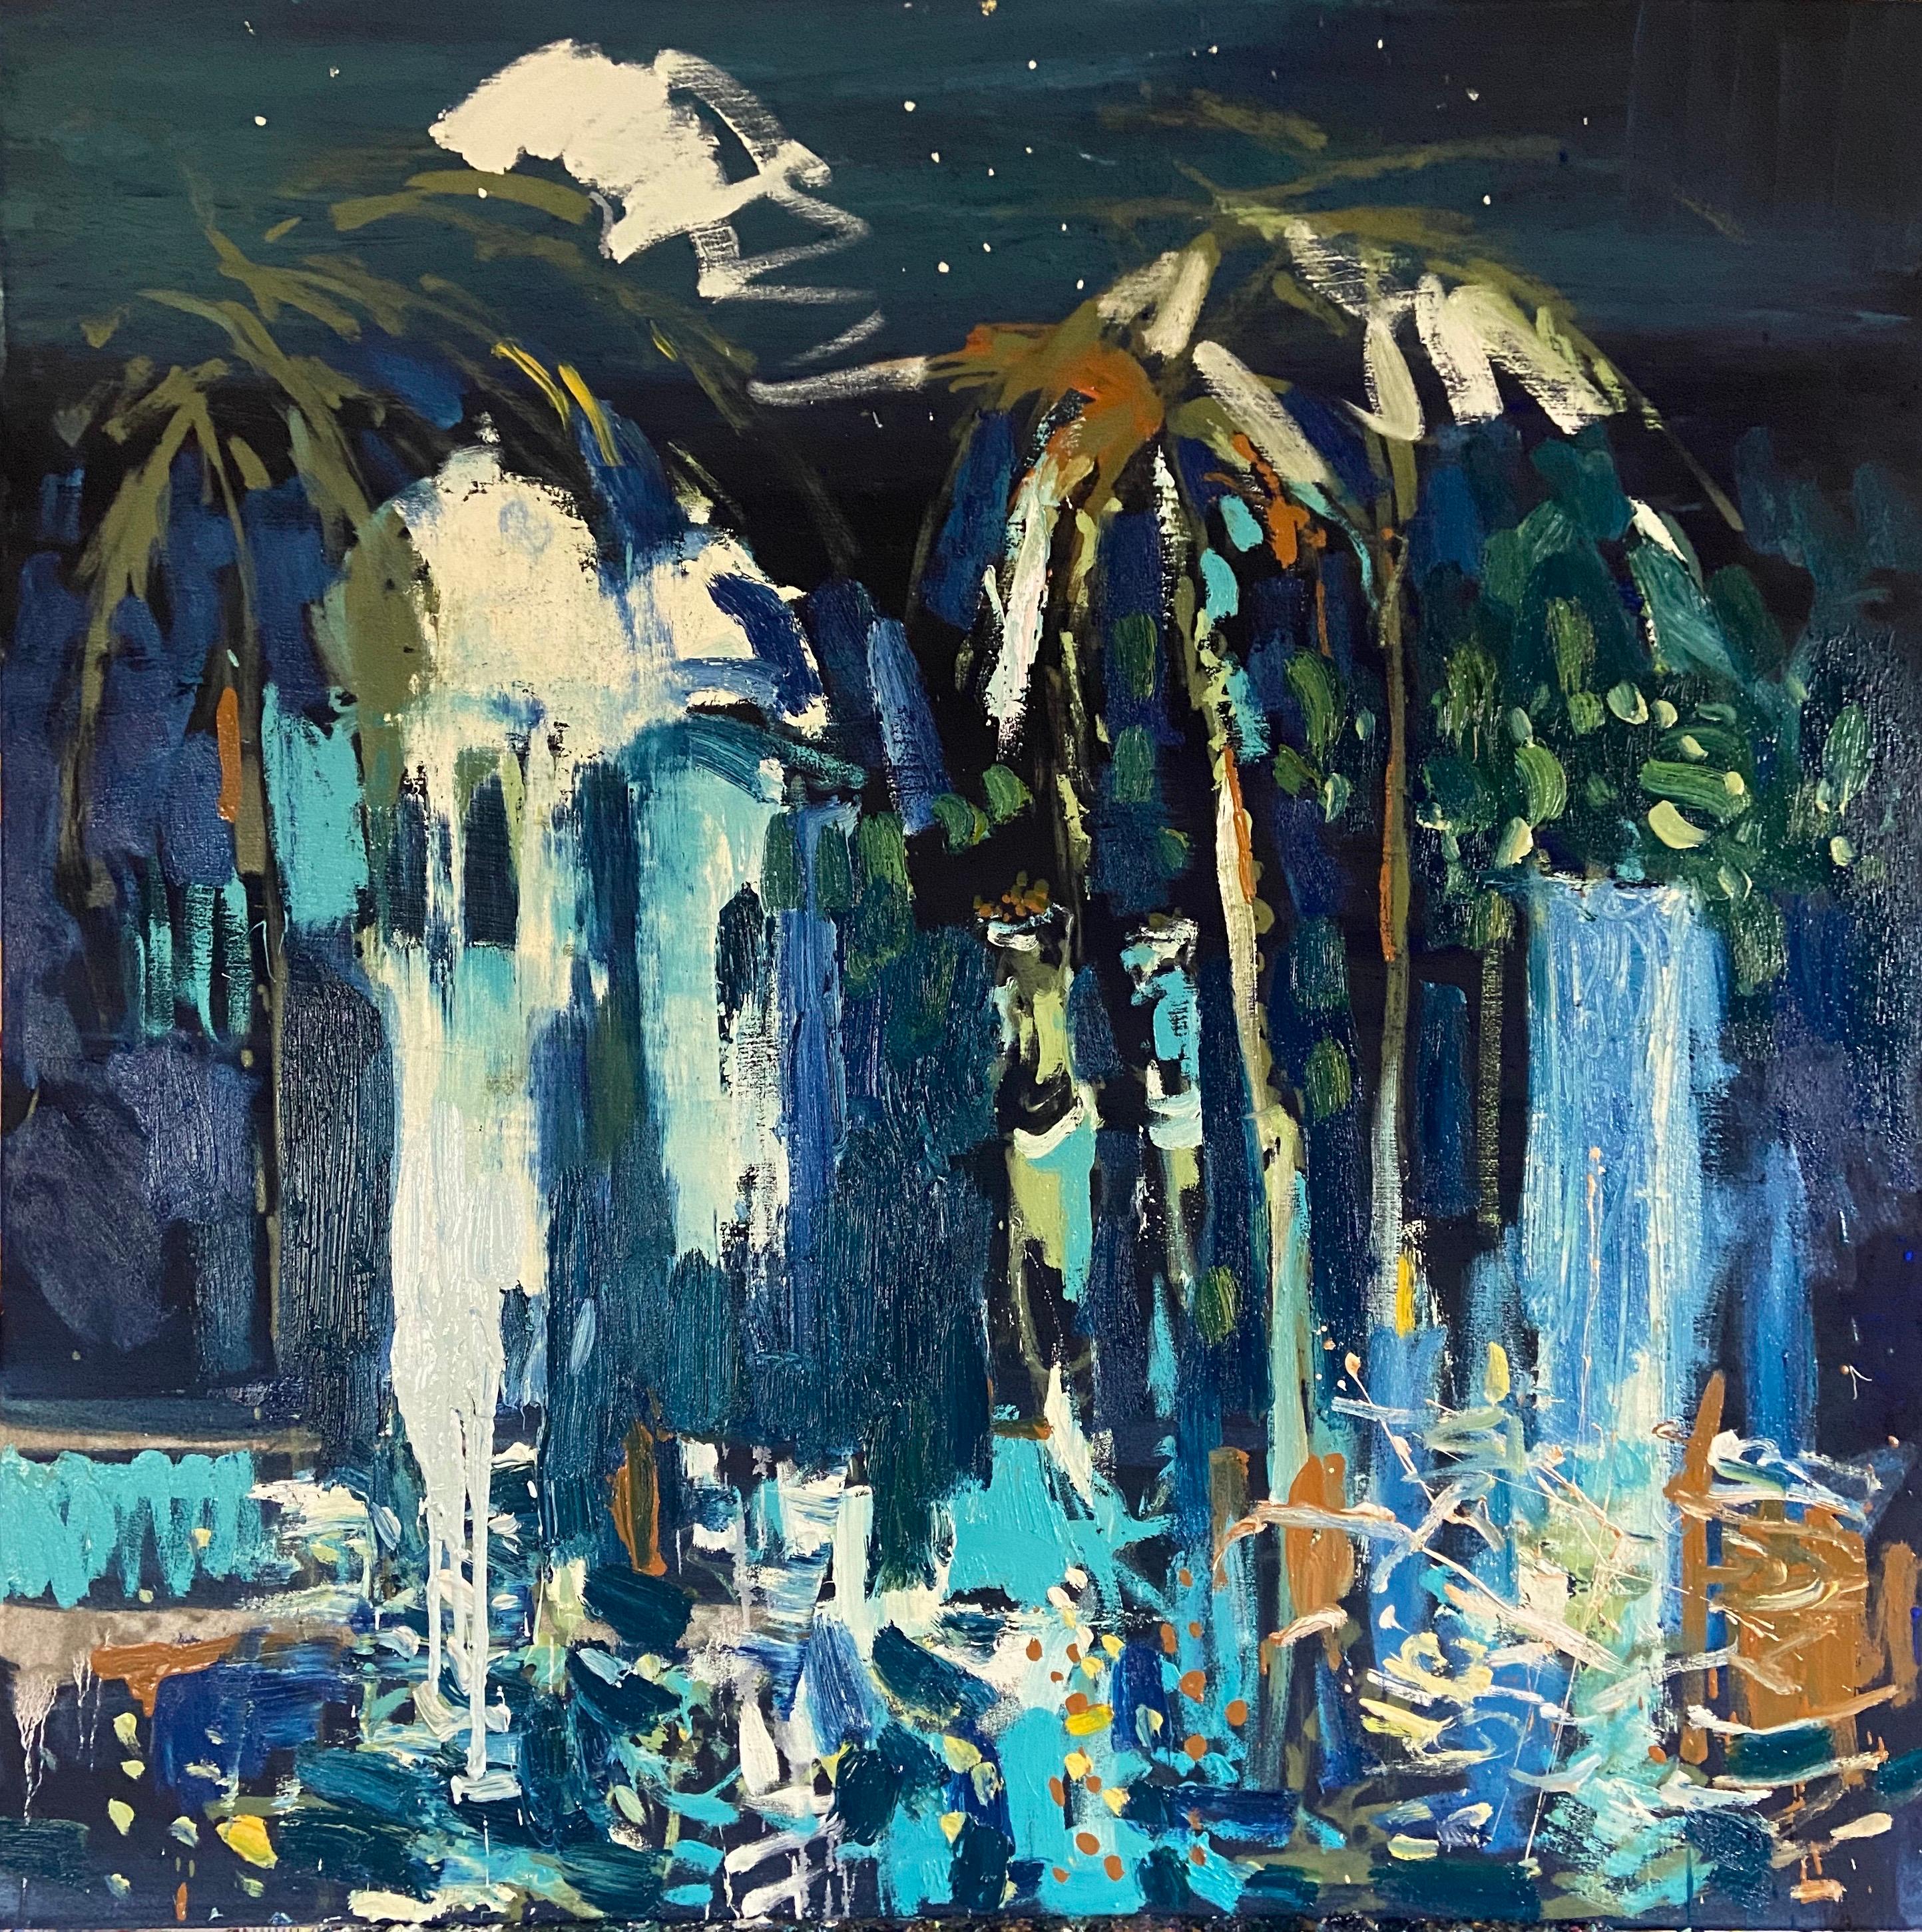 Paul wadsworth Abstract Painting - "Night Garden". Contemporary Abstract Expressionist Oil Painting